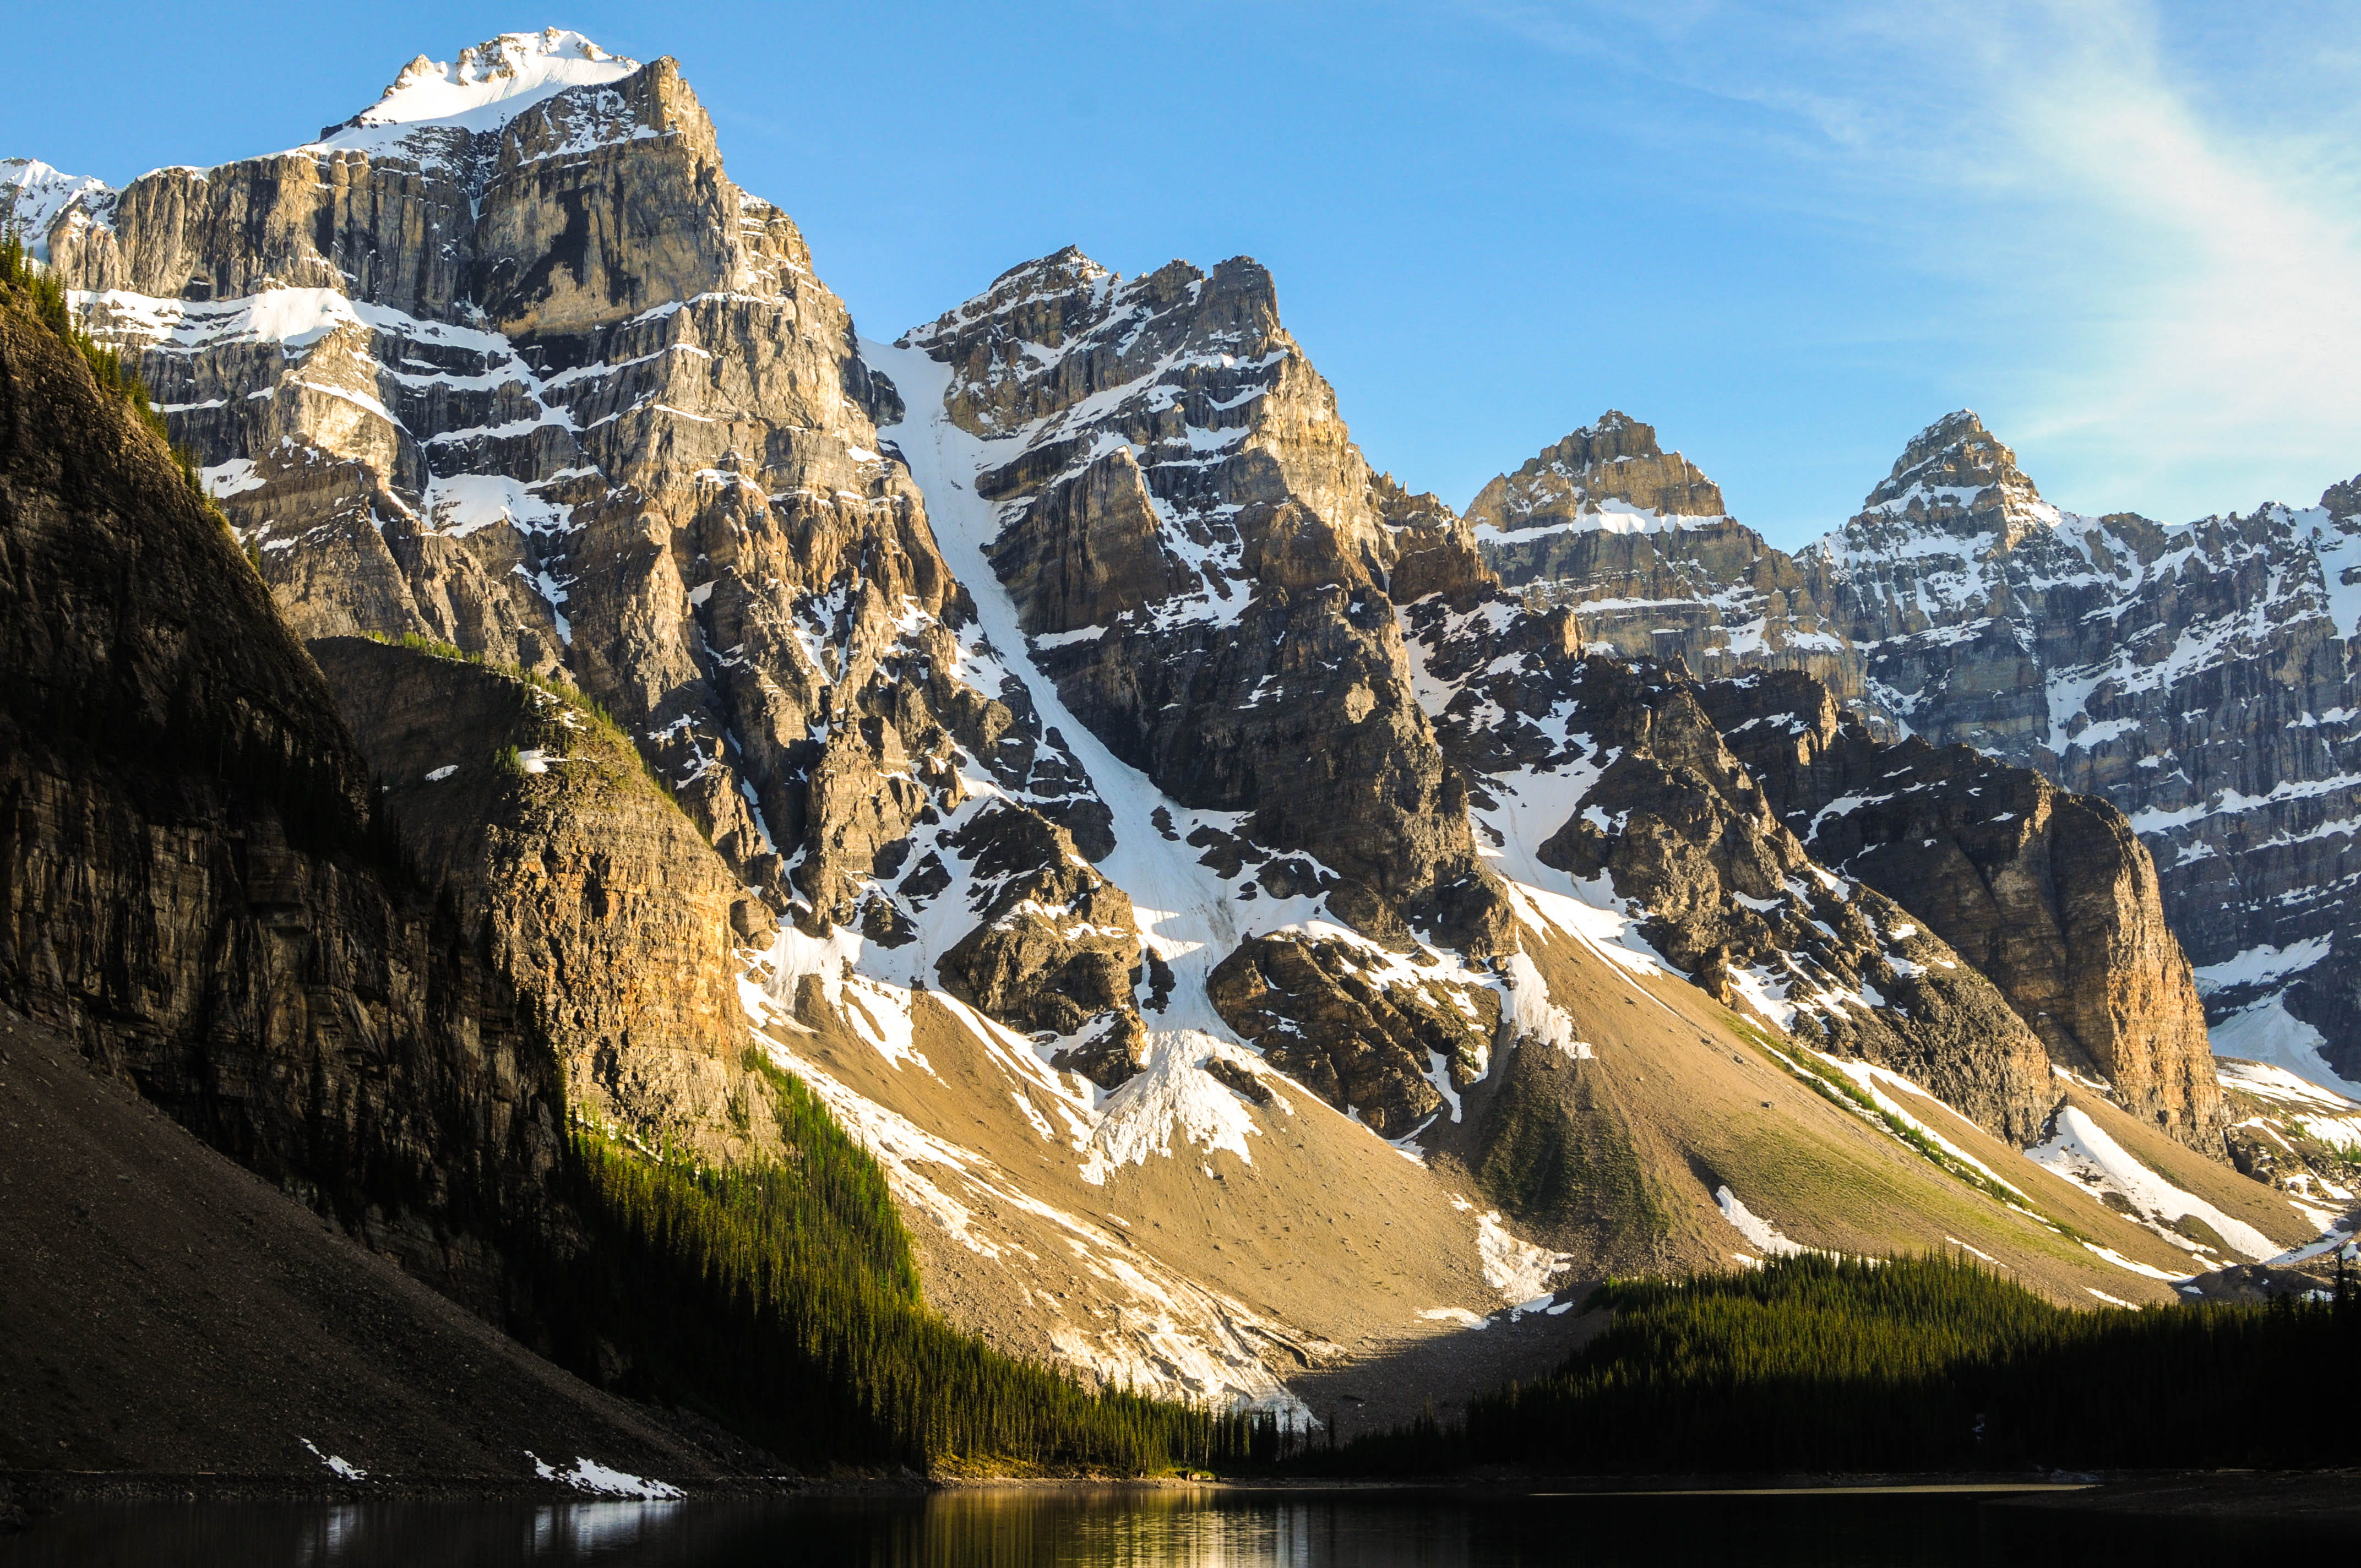 snow capped mountain near body of water, snowy mountain near body of water